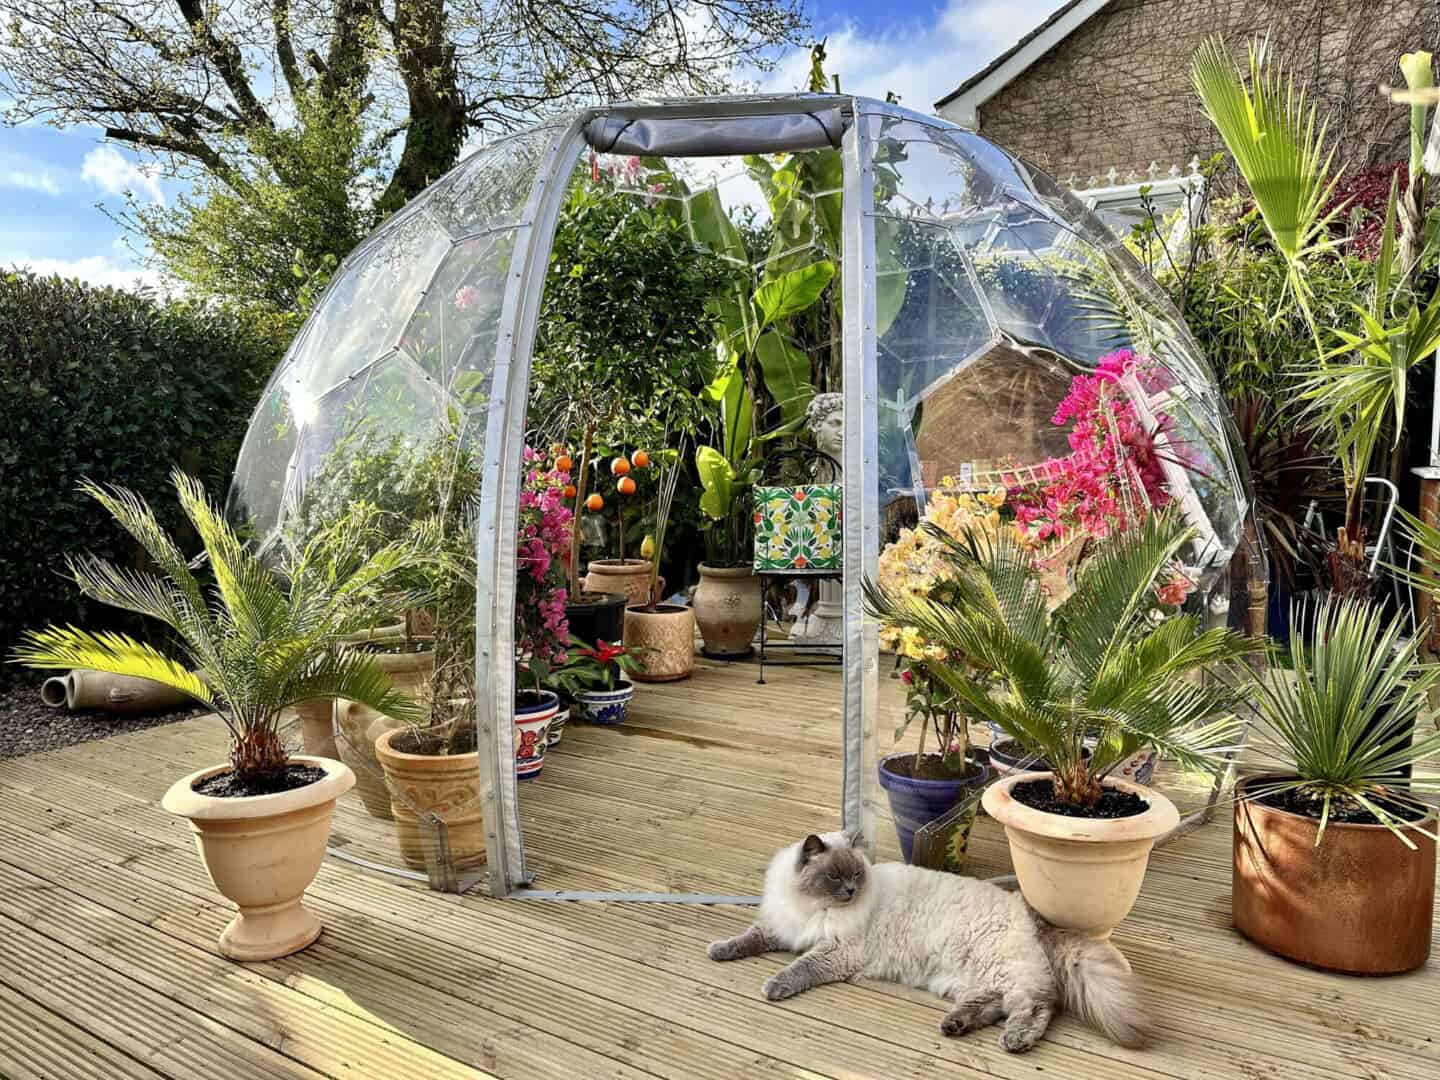 A garden dome full of plants and small trees with a cat sitting outside on the decking